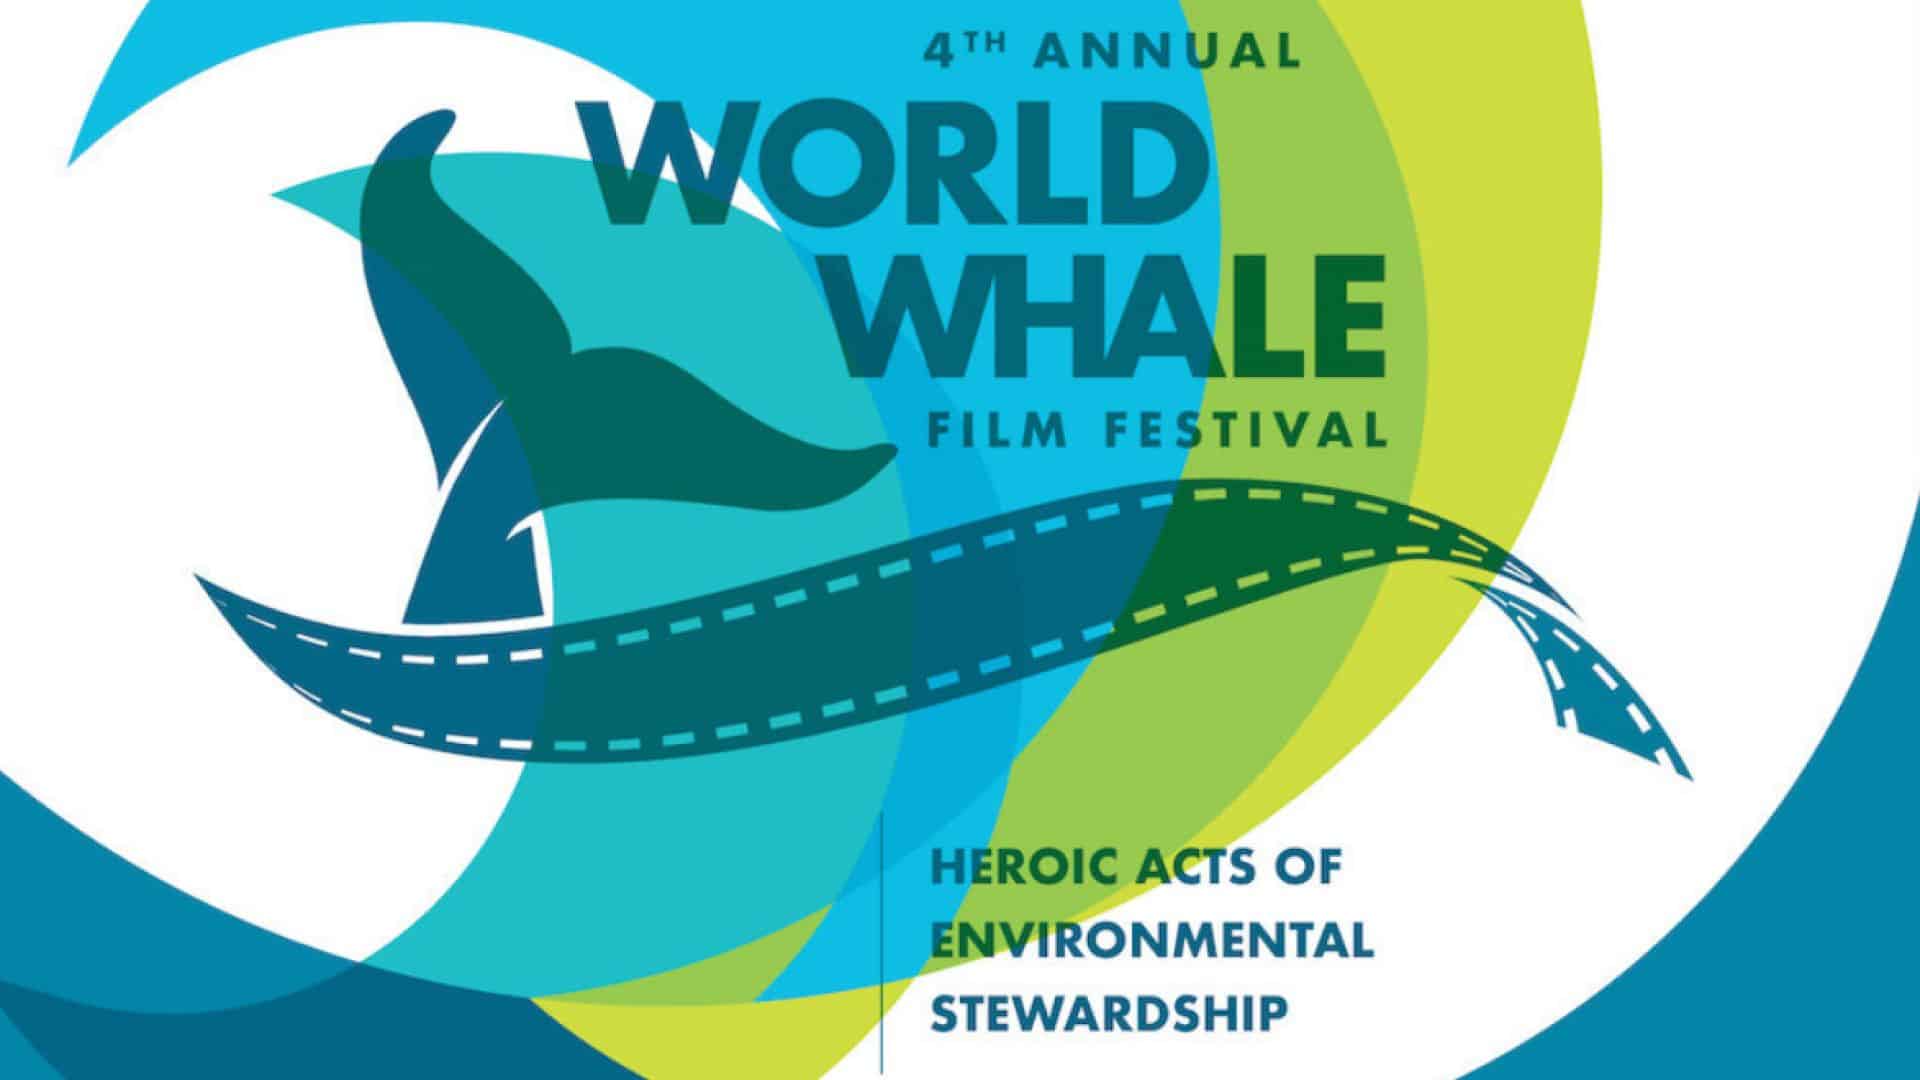 The logo of the 4th annual World Whale Film Festival.